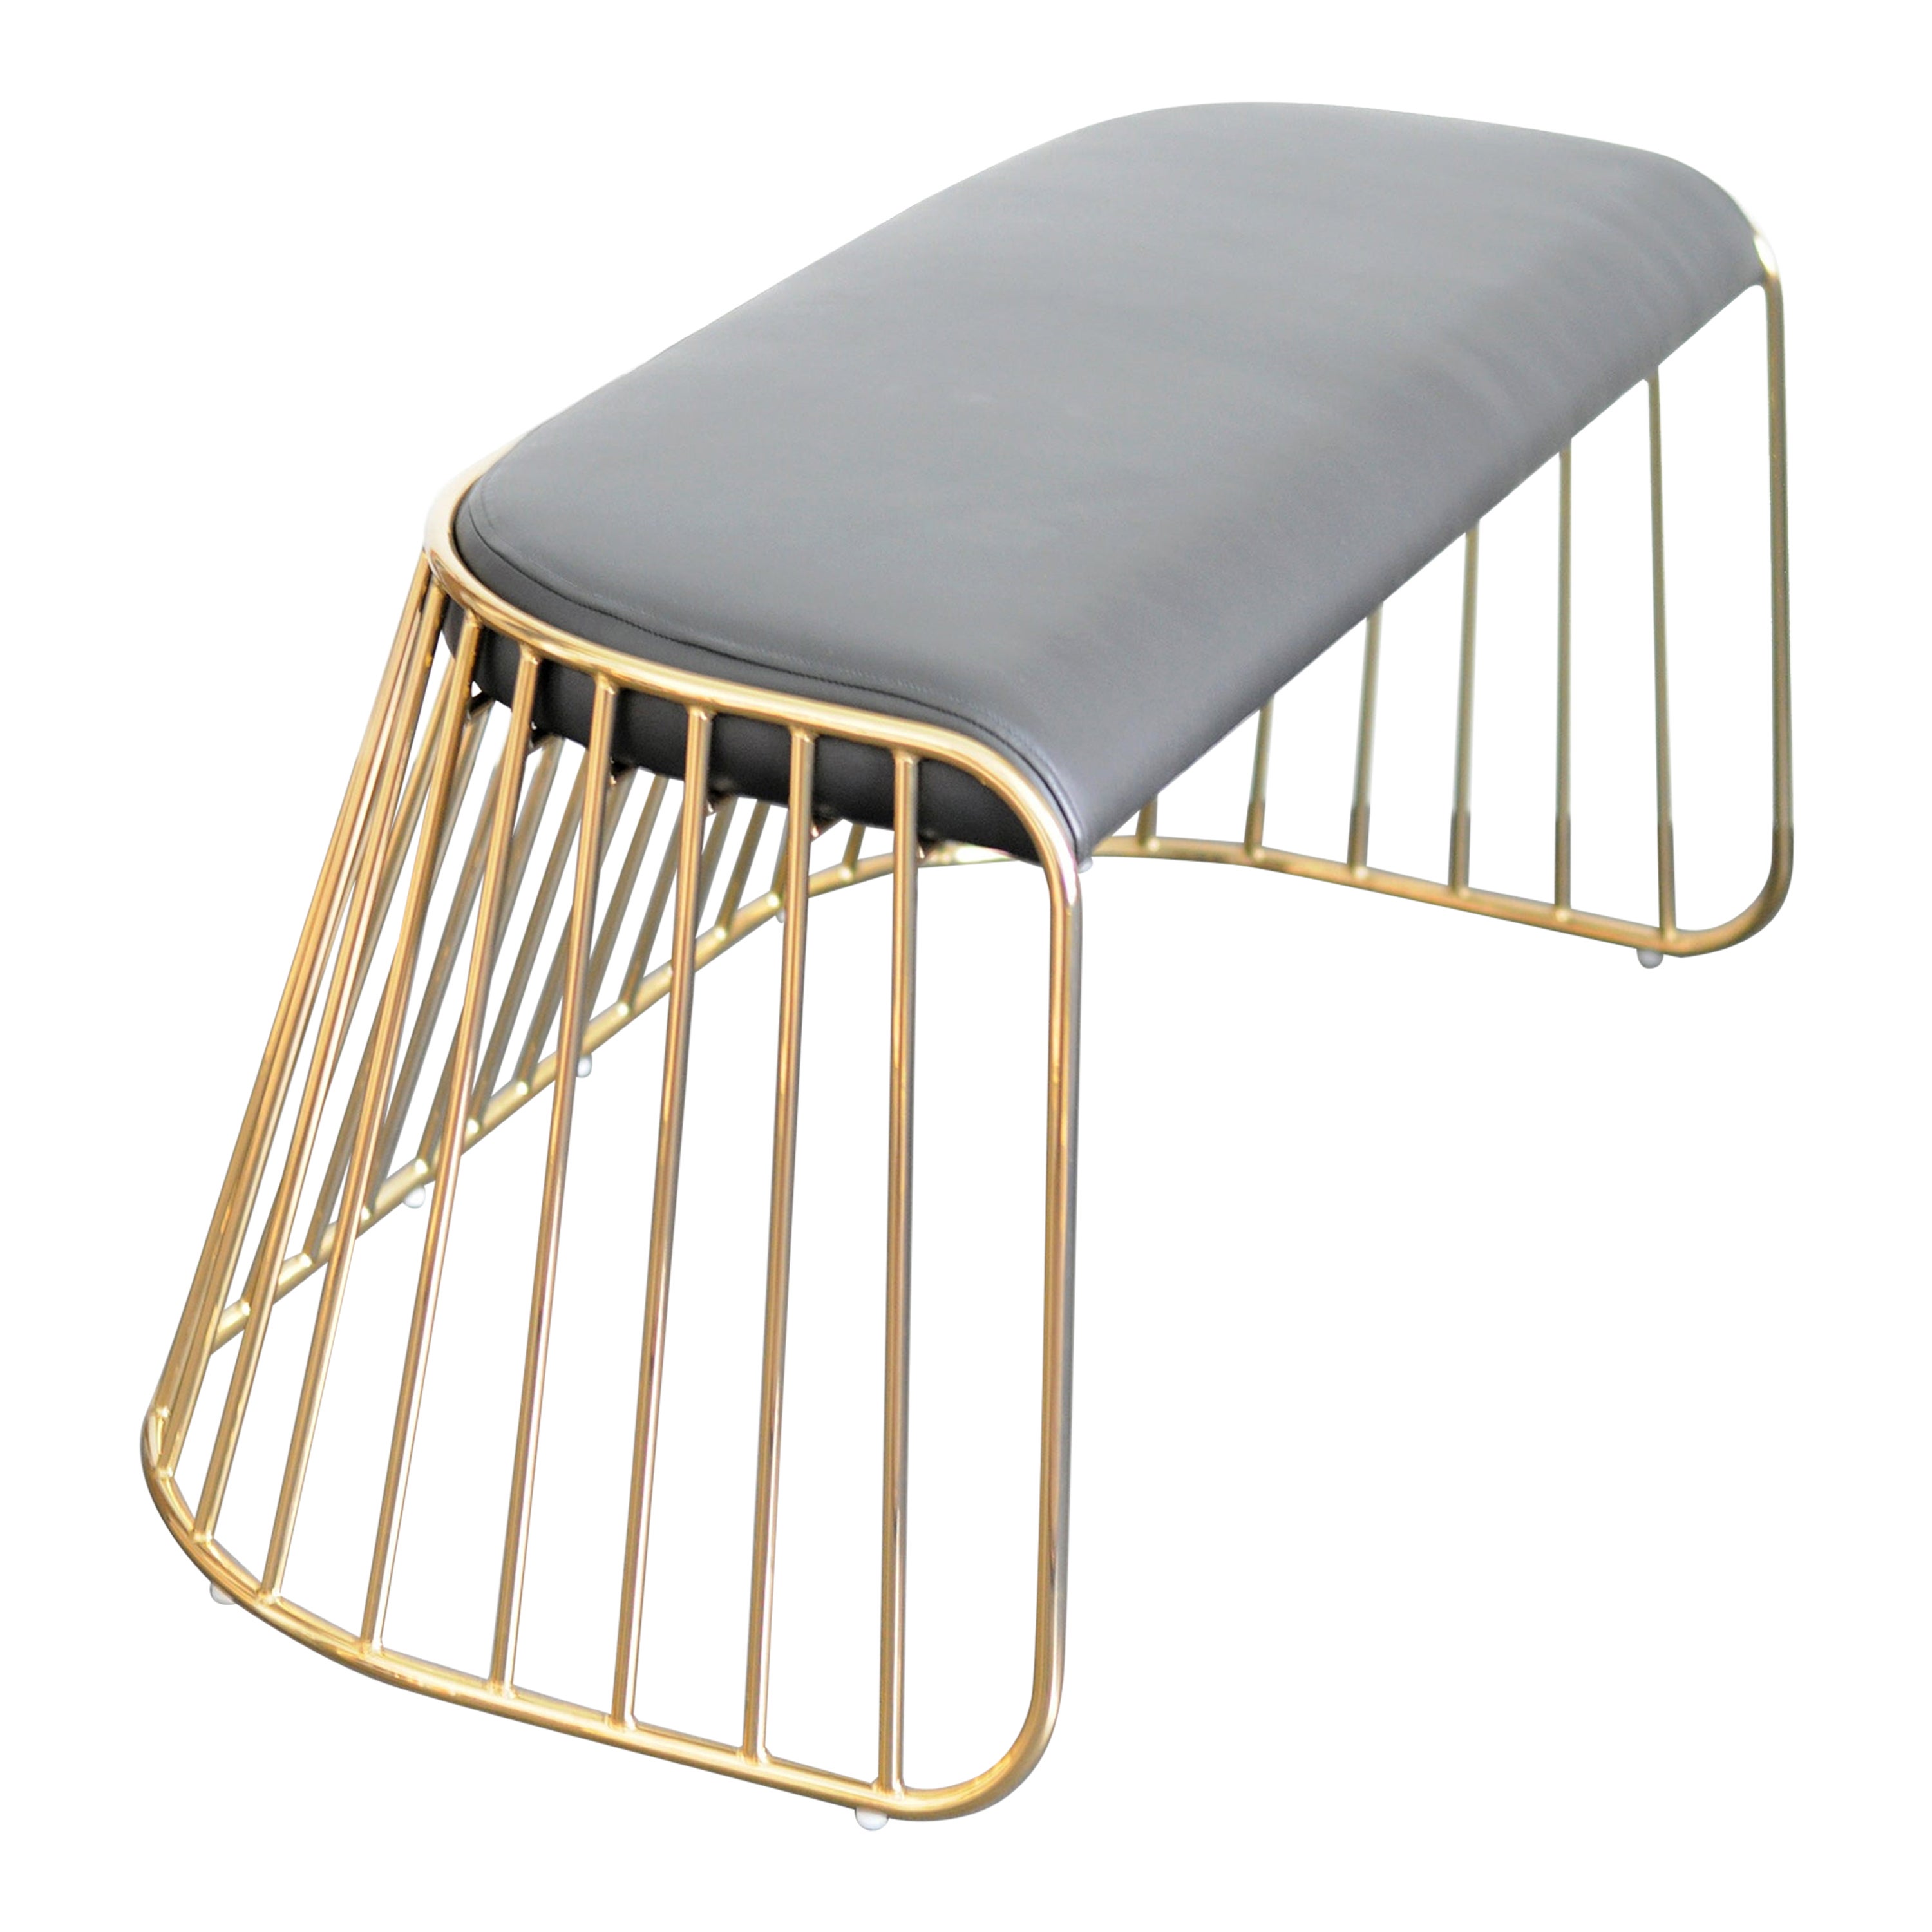 Bride’s Veil Double Low Stool by Phase Design For Sale